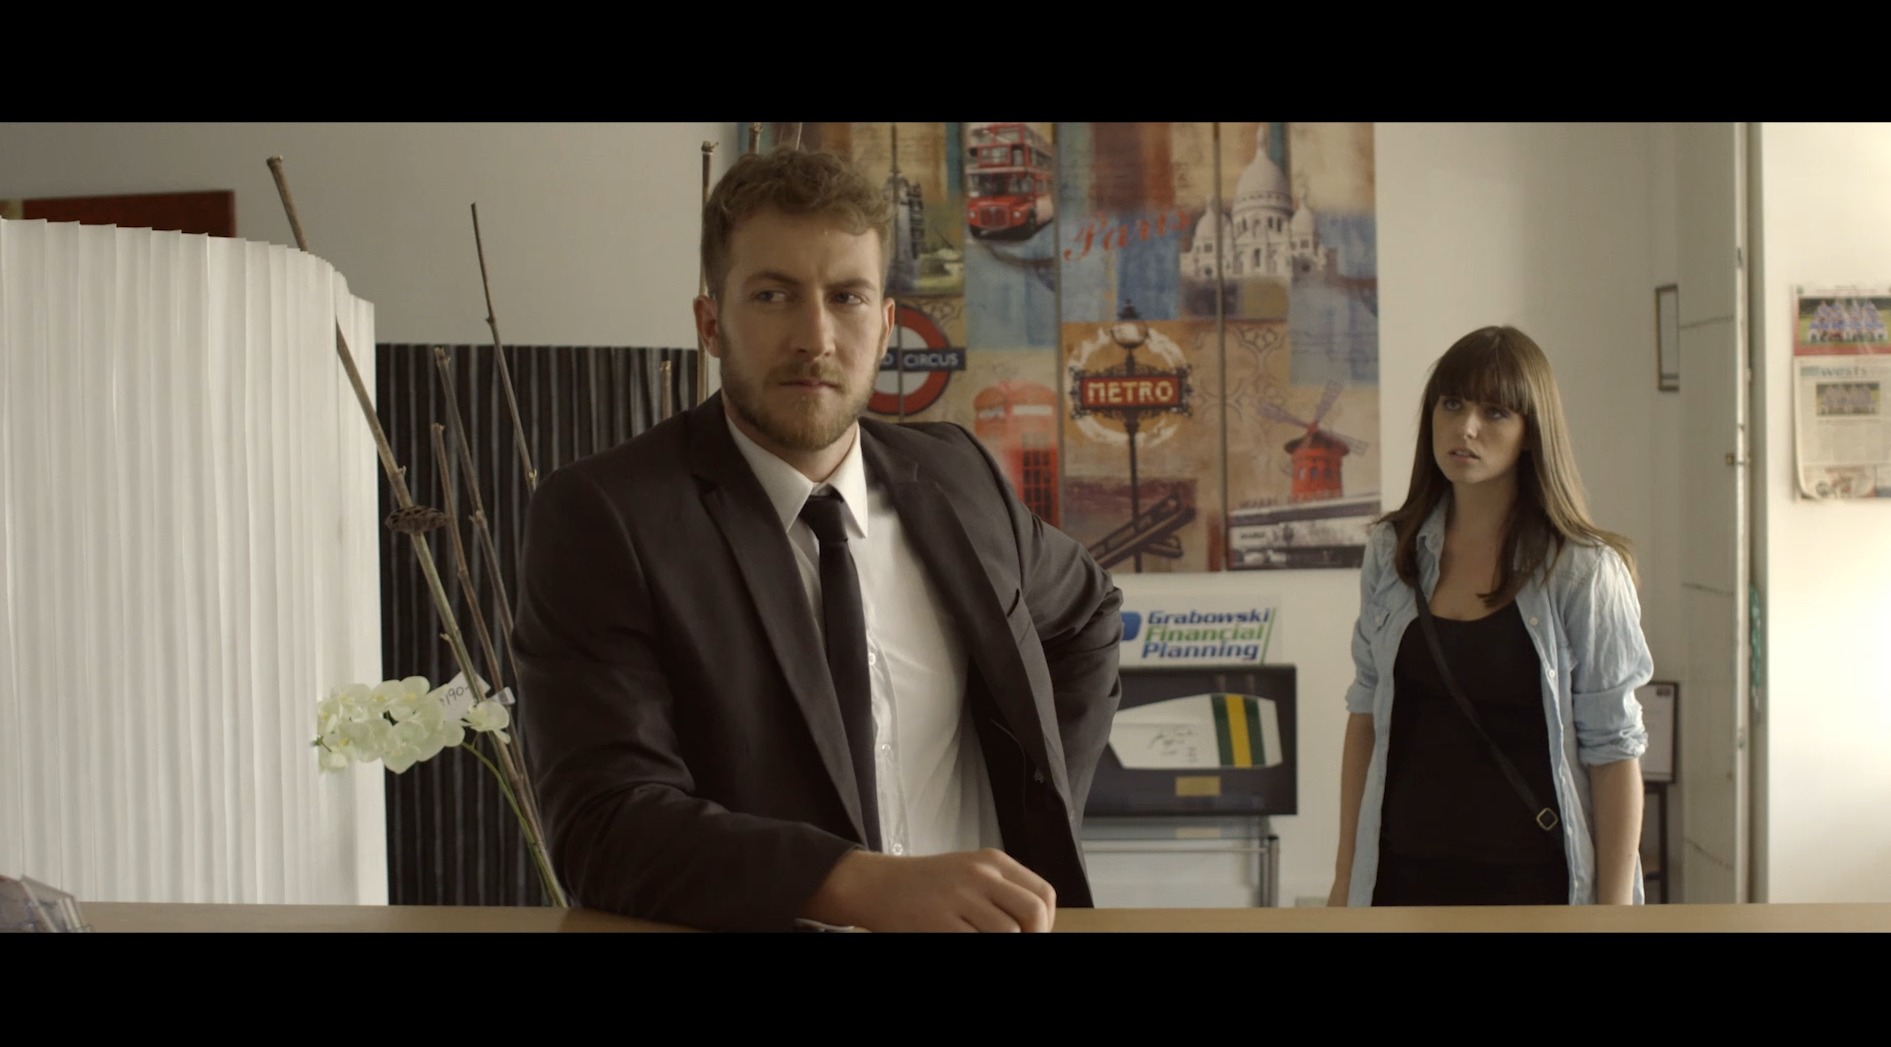 Screenshot from my short film 'Genetics' with Aaron Cottrell and Kelly Robinson